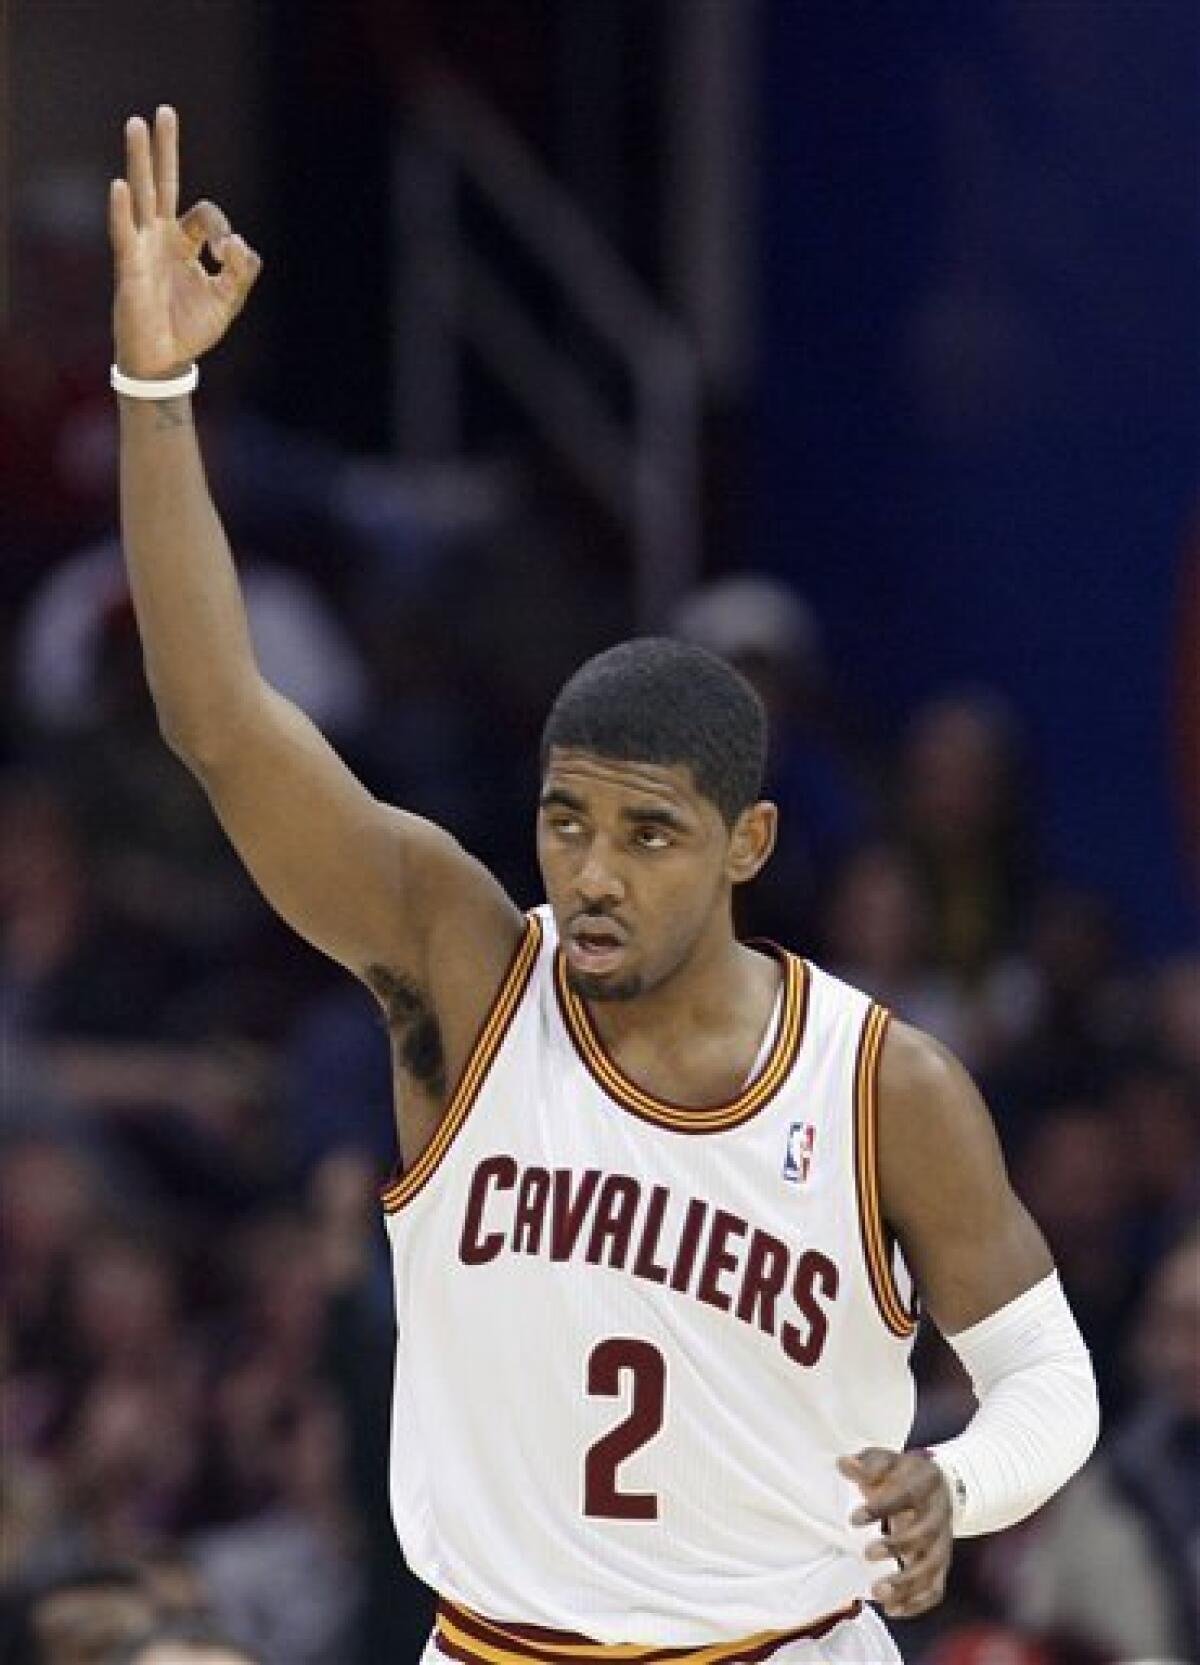 Top pick Kyrie Irving introduced by Cavs - The San Diego Union-Tribune